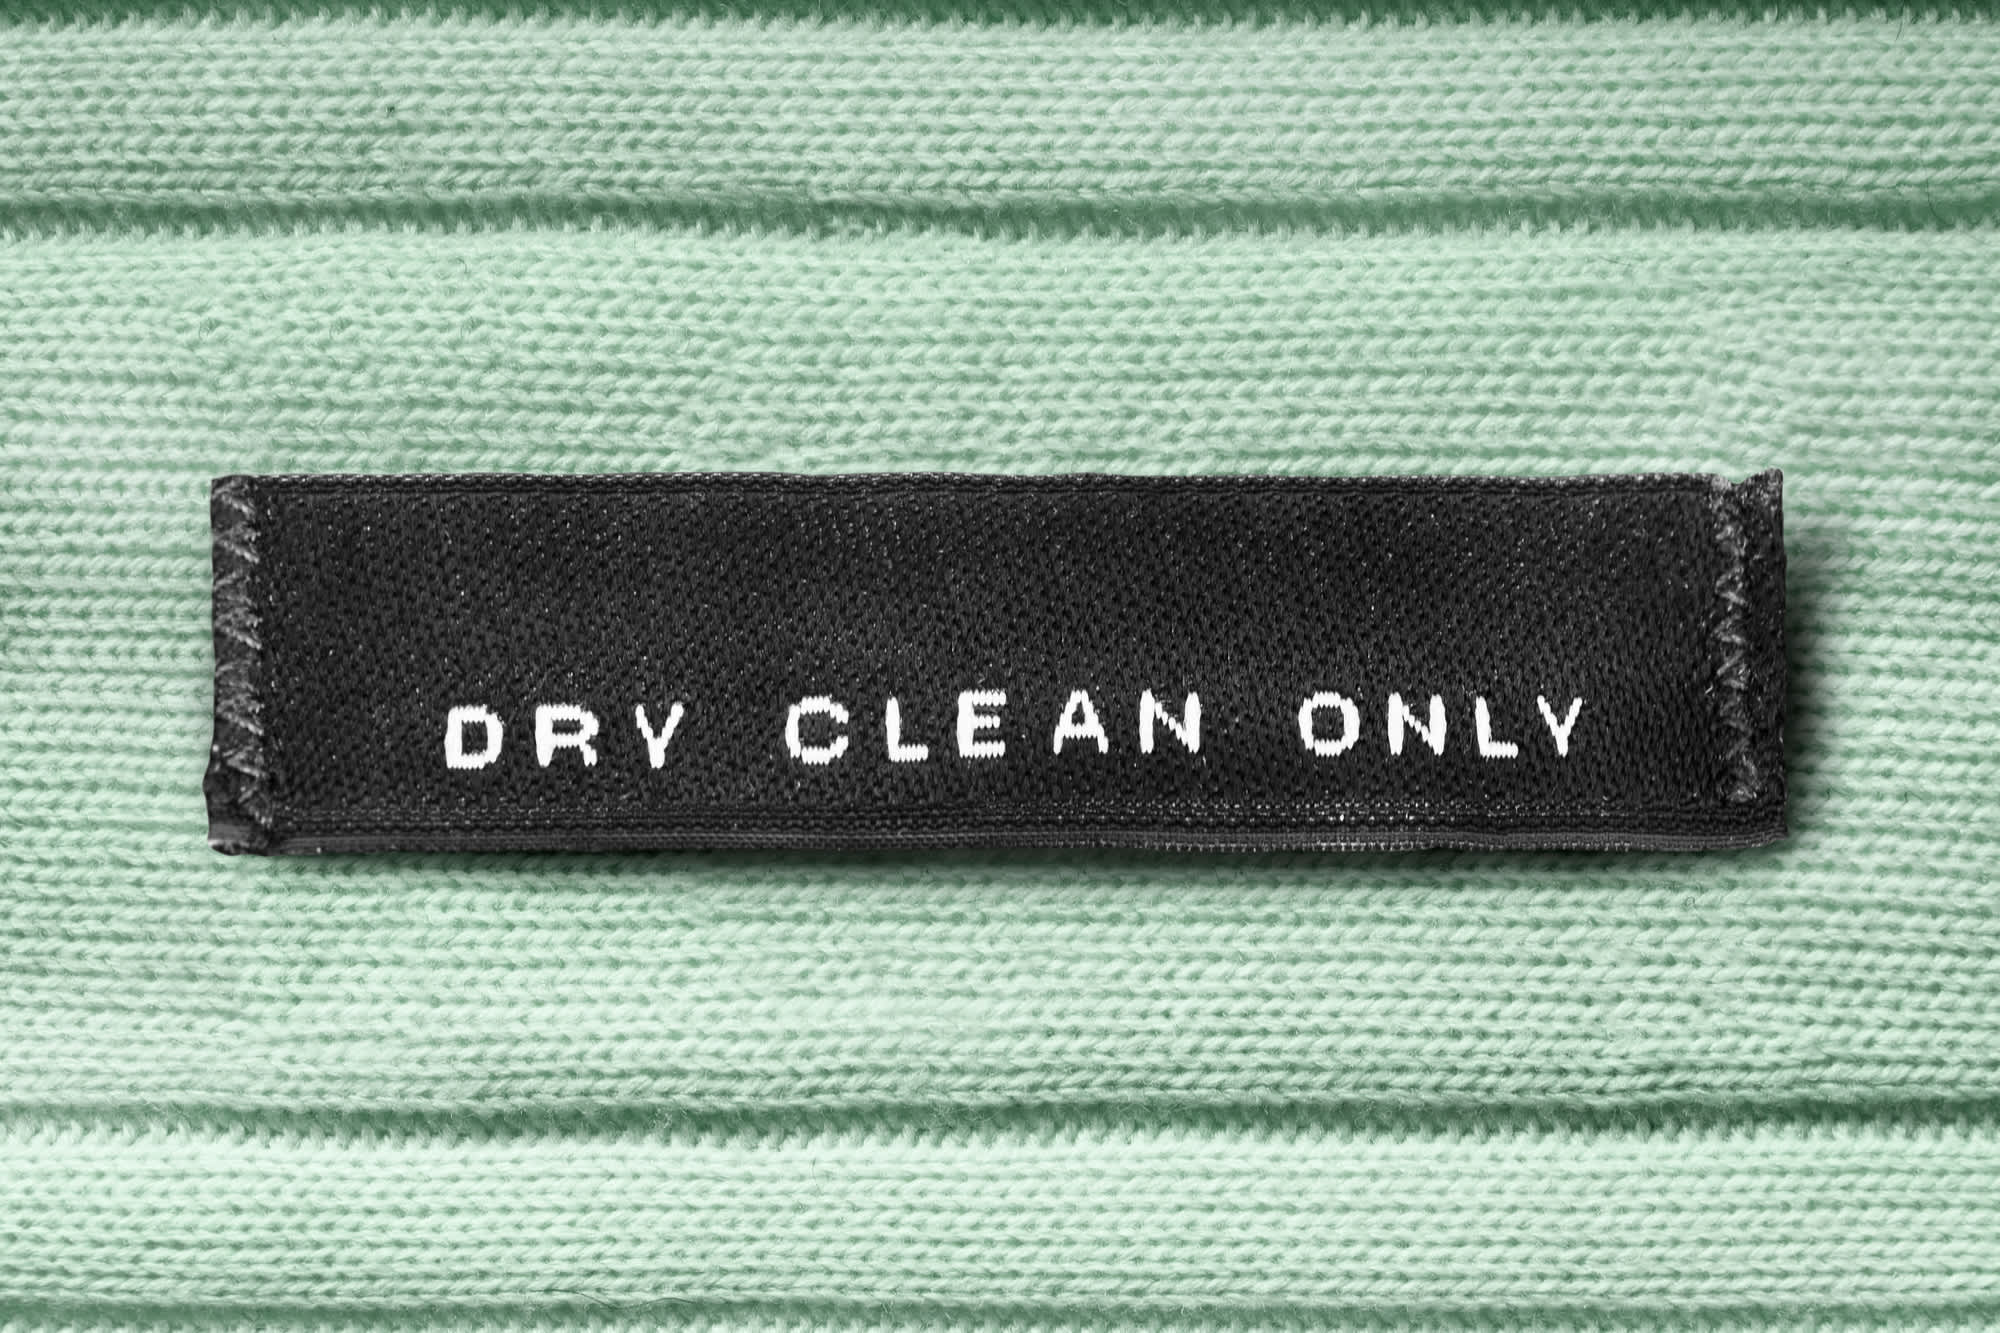 Dry cleaning only